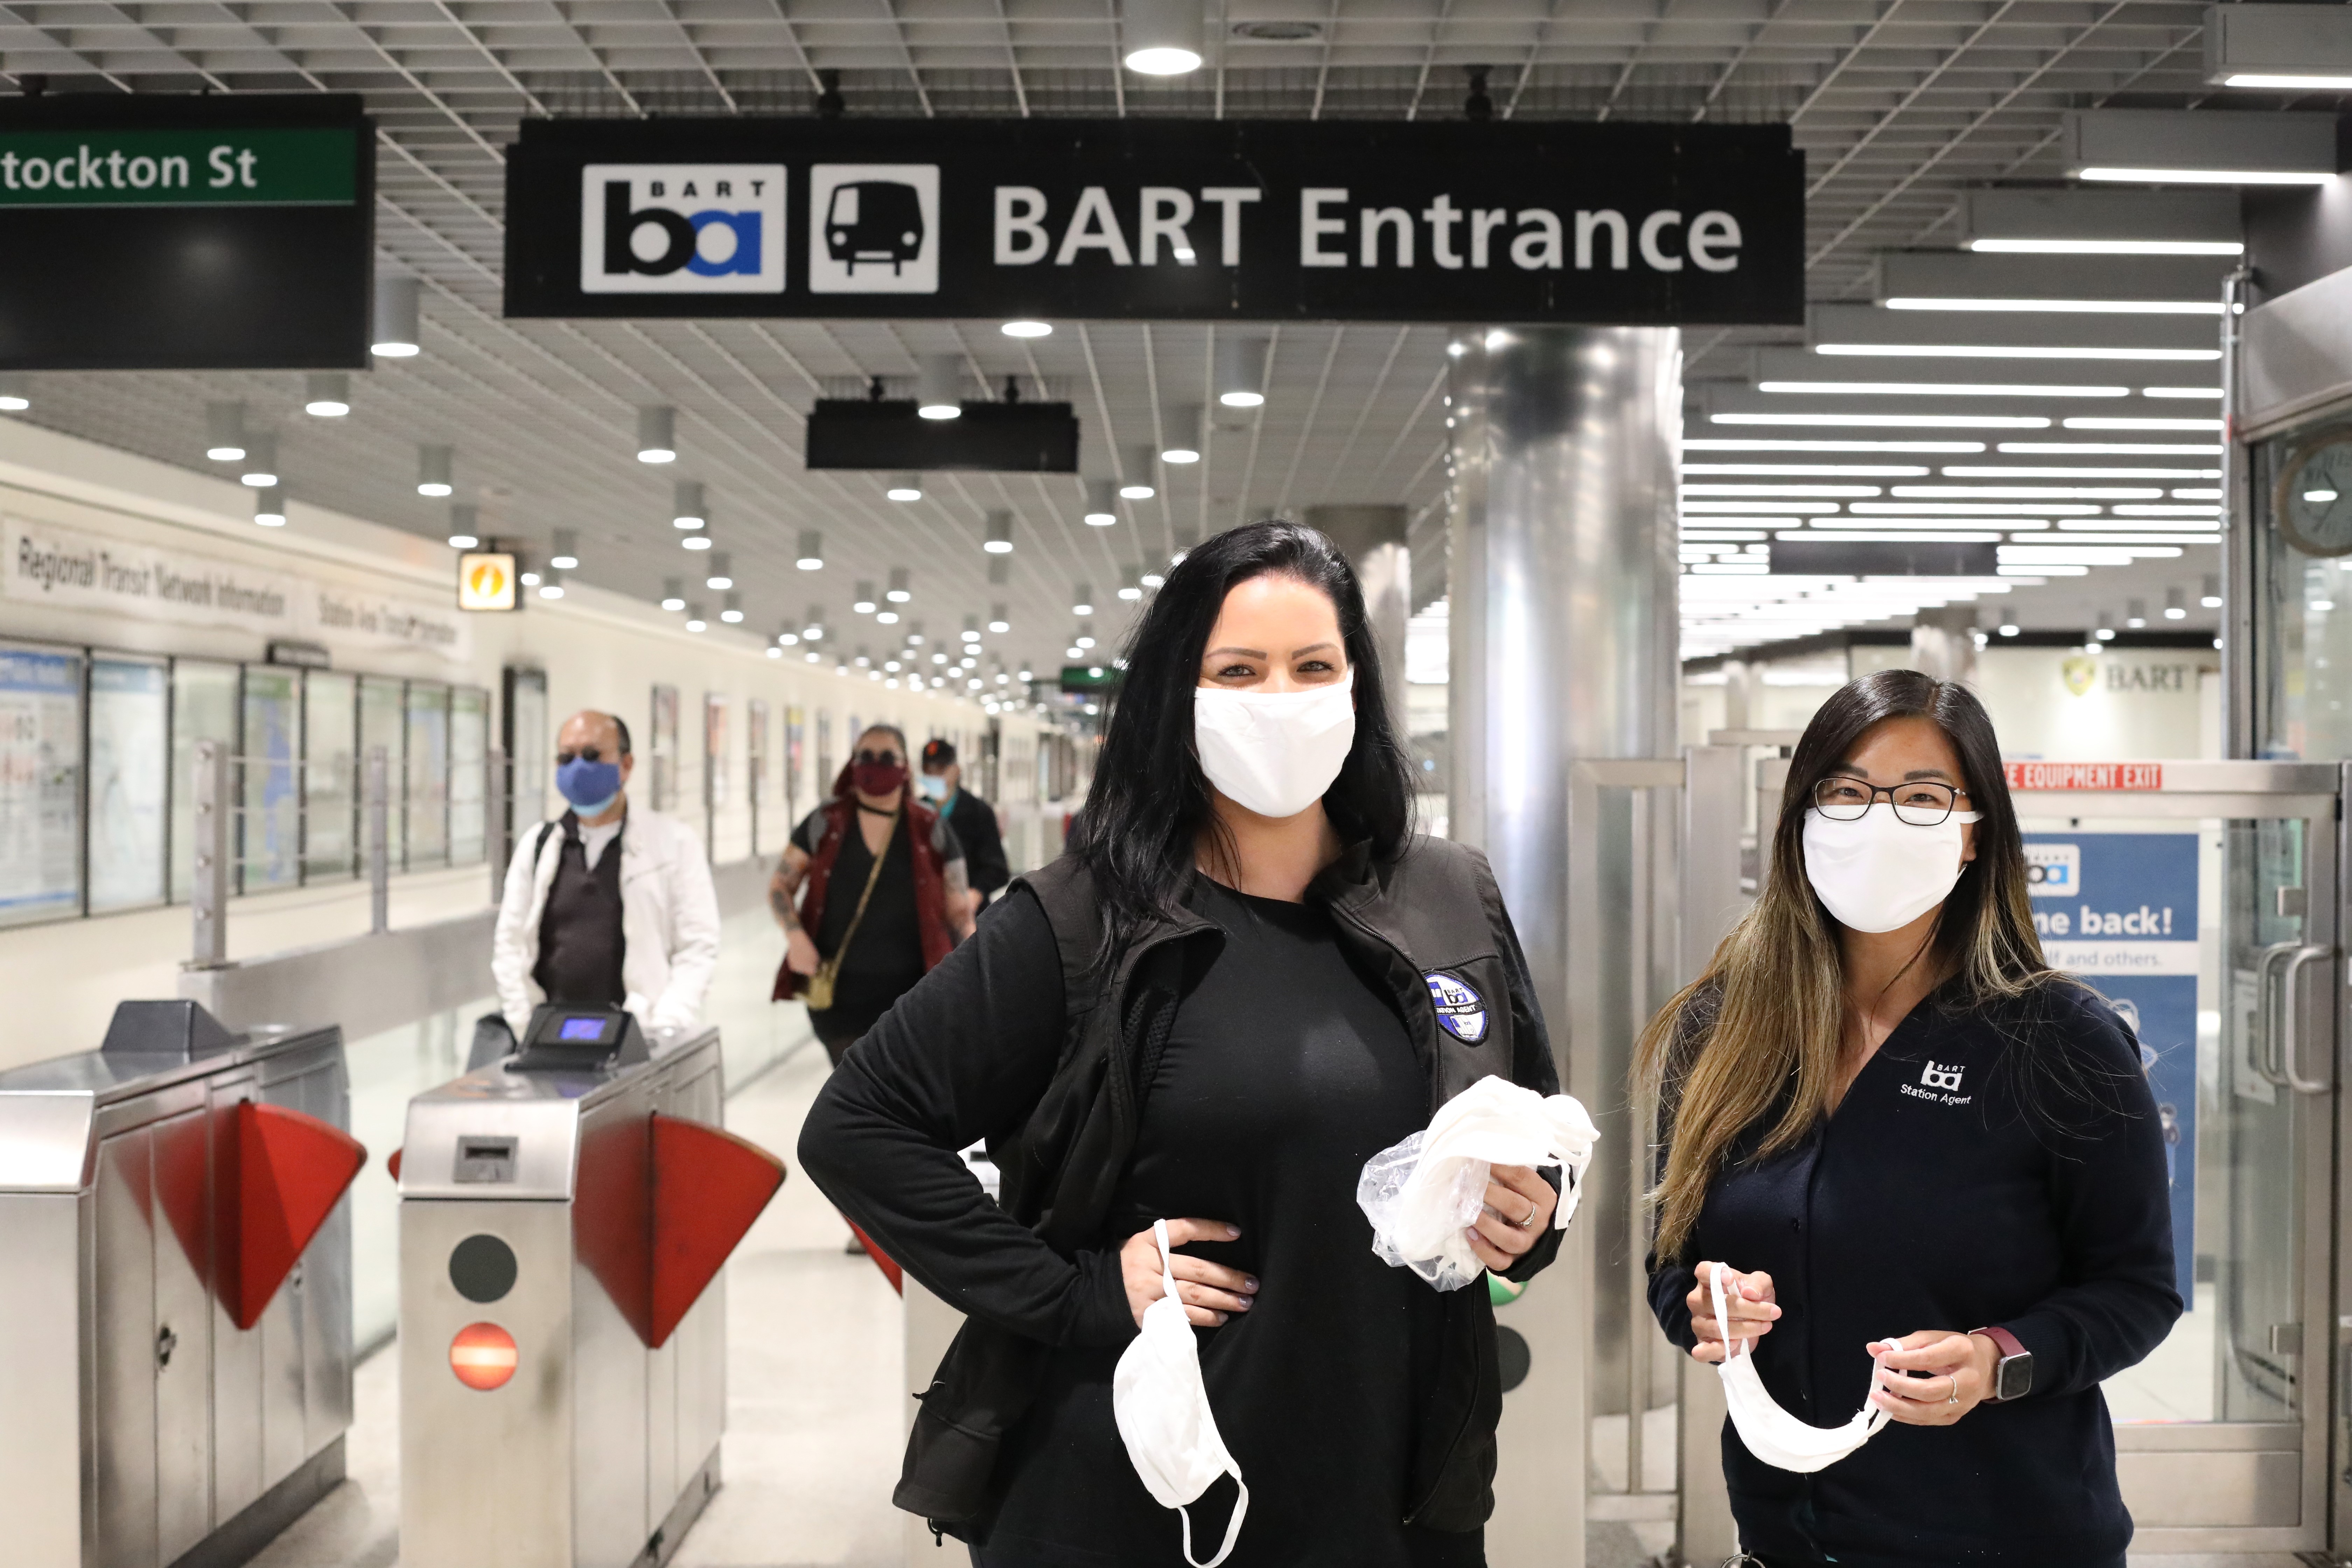 Masks provided by FTA are now available in all stations